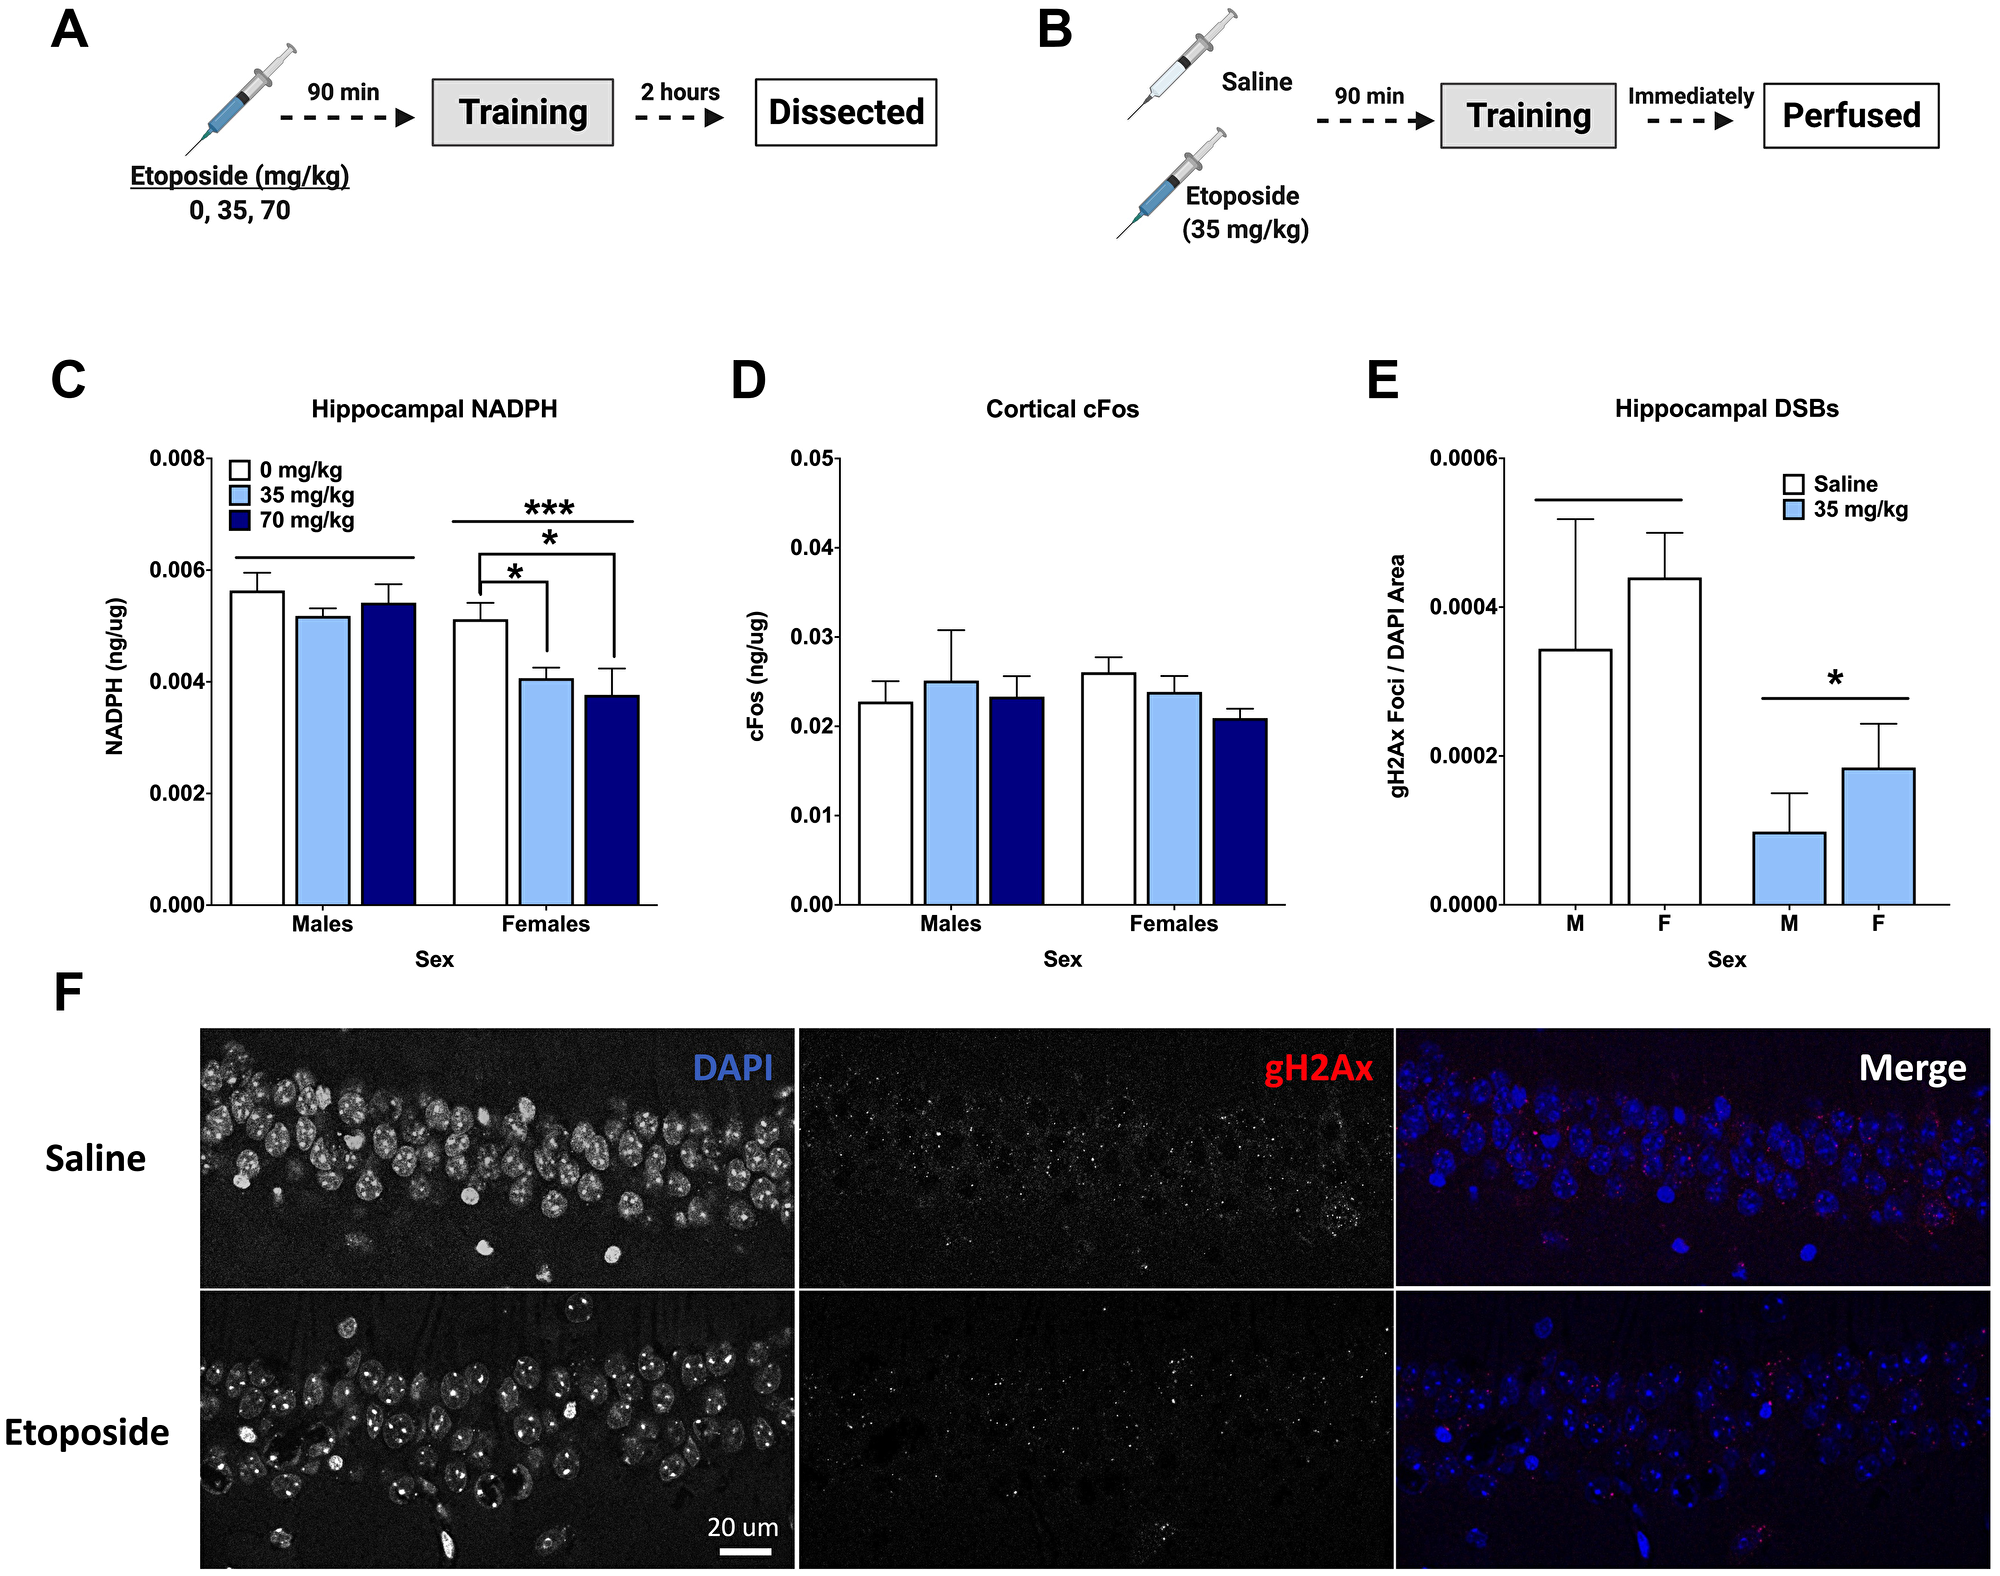 Etoposide decreases hippocampal γH2Ax, hippocampal NADPH, and cortical cFos in a sex-dependent manner.